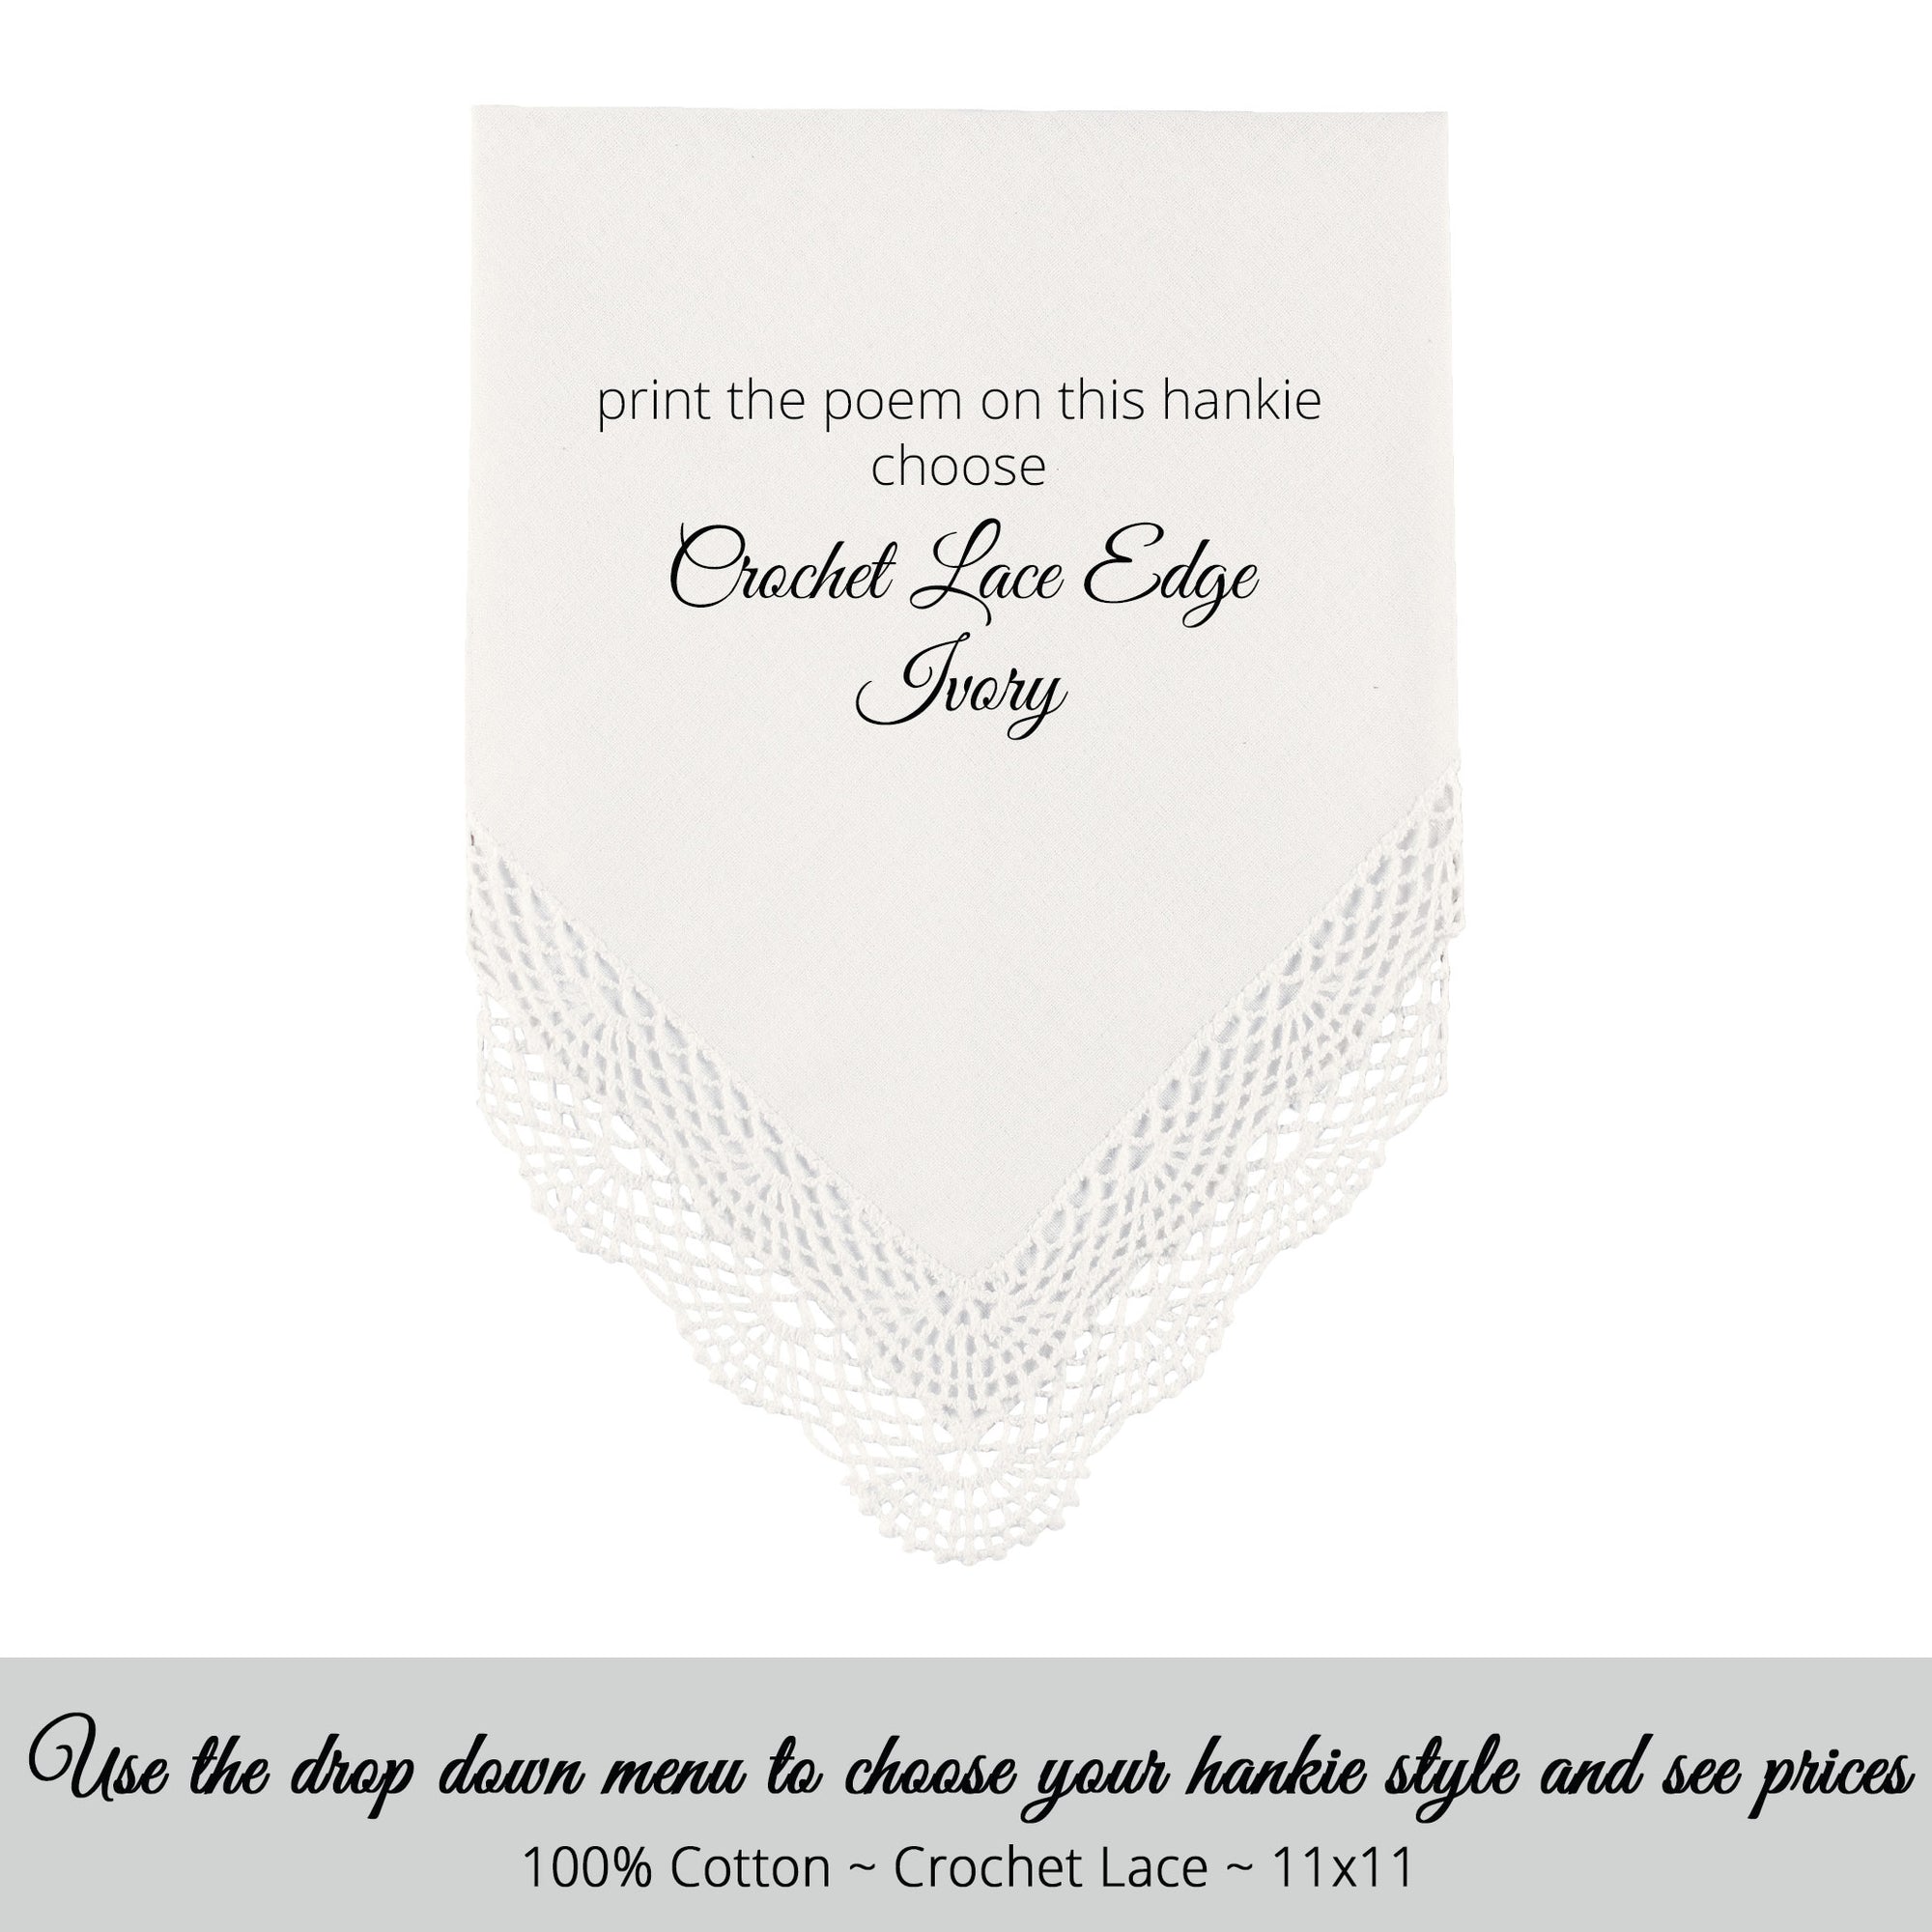 Wedding handkerchief ivory with crochet lace edge for the mother of the groom